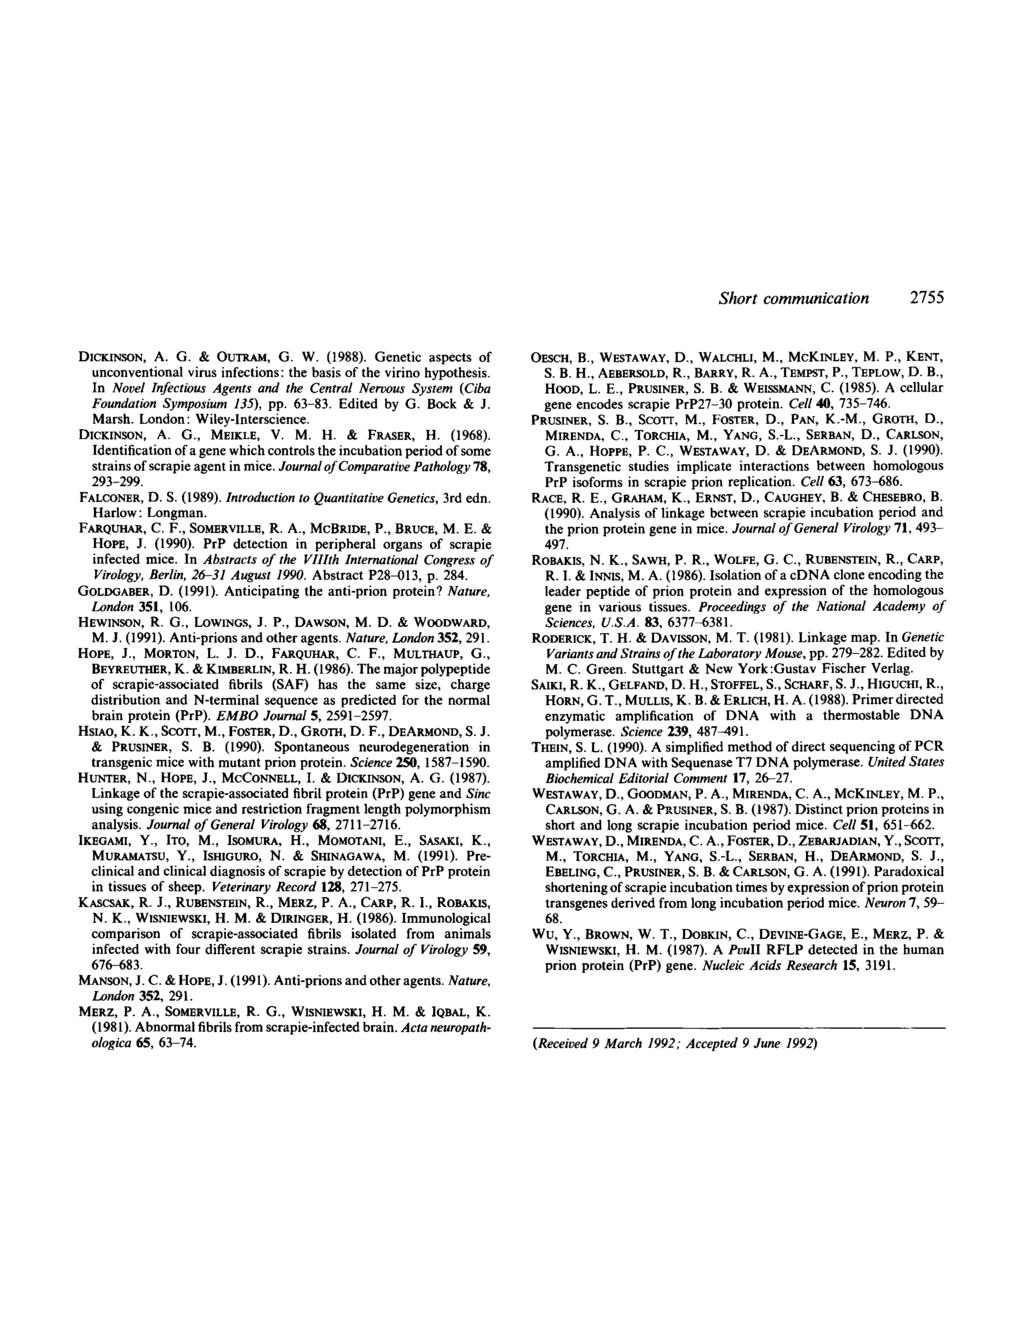 Short communication 2755 DICKINSON, A. G. & OUTRAn, G. W. (1988). Genetic aspects of unconventional virus infections: the basis of the virino hypothesis.